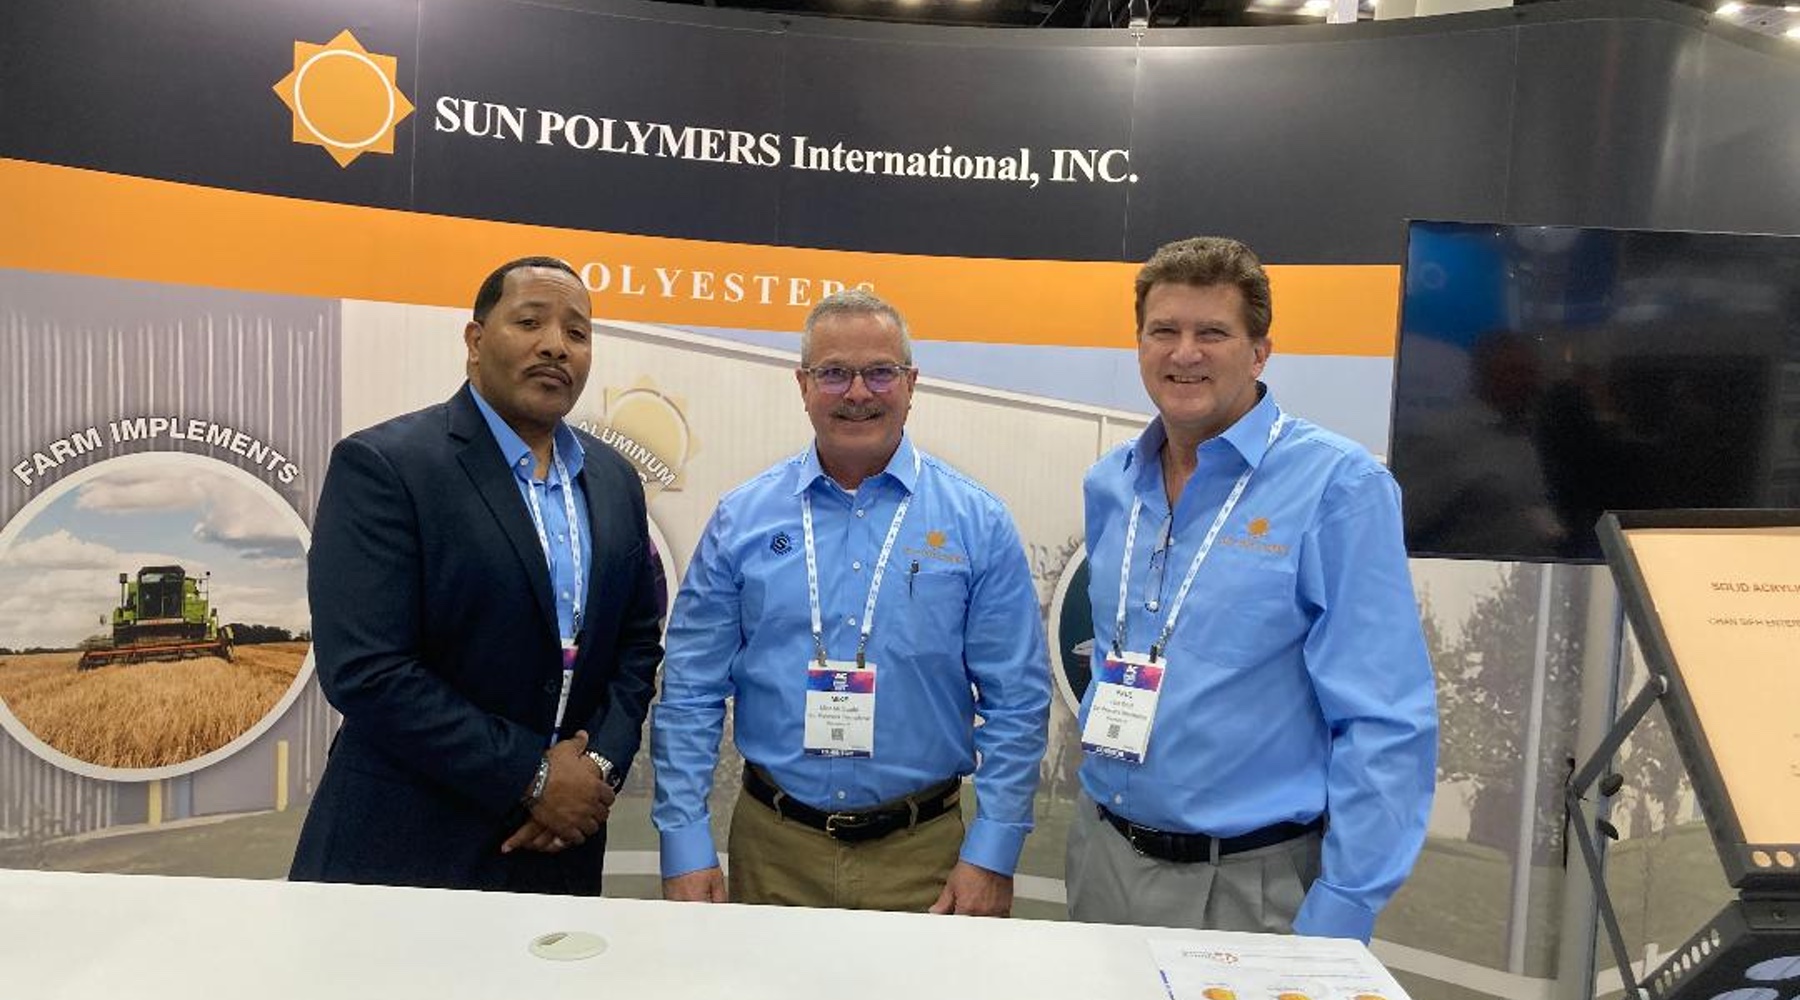 Sun Polymers booth at the 2022 American Coatings Show